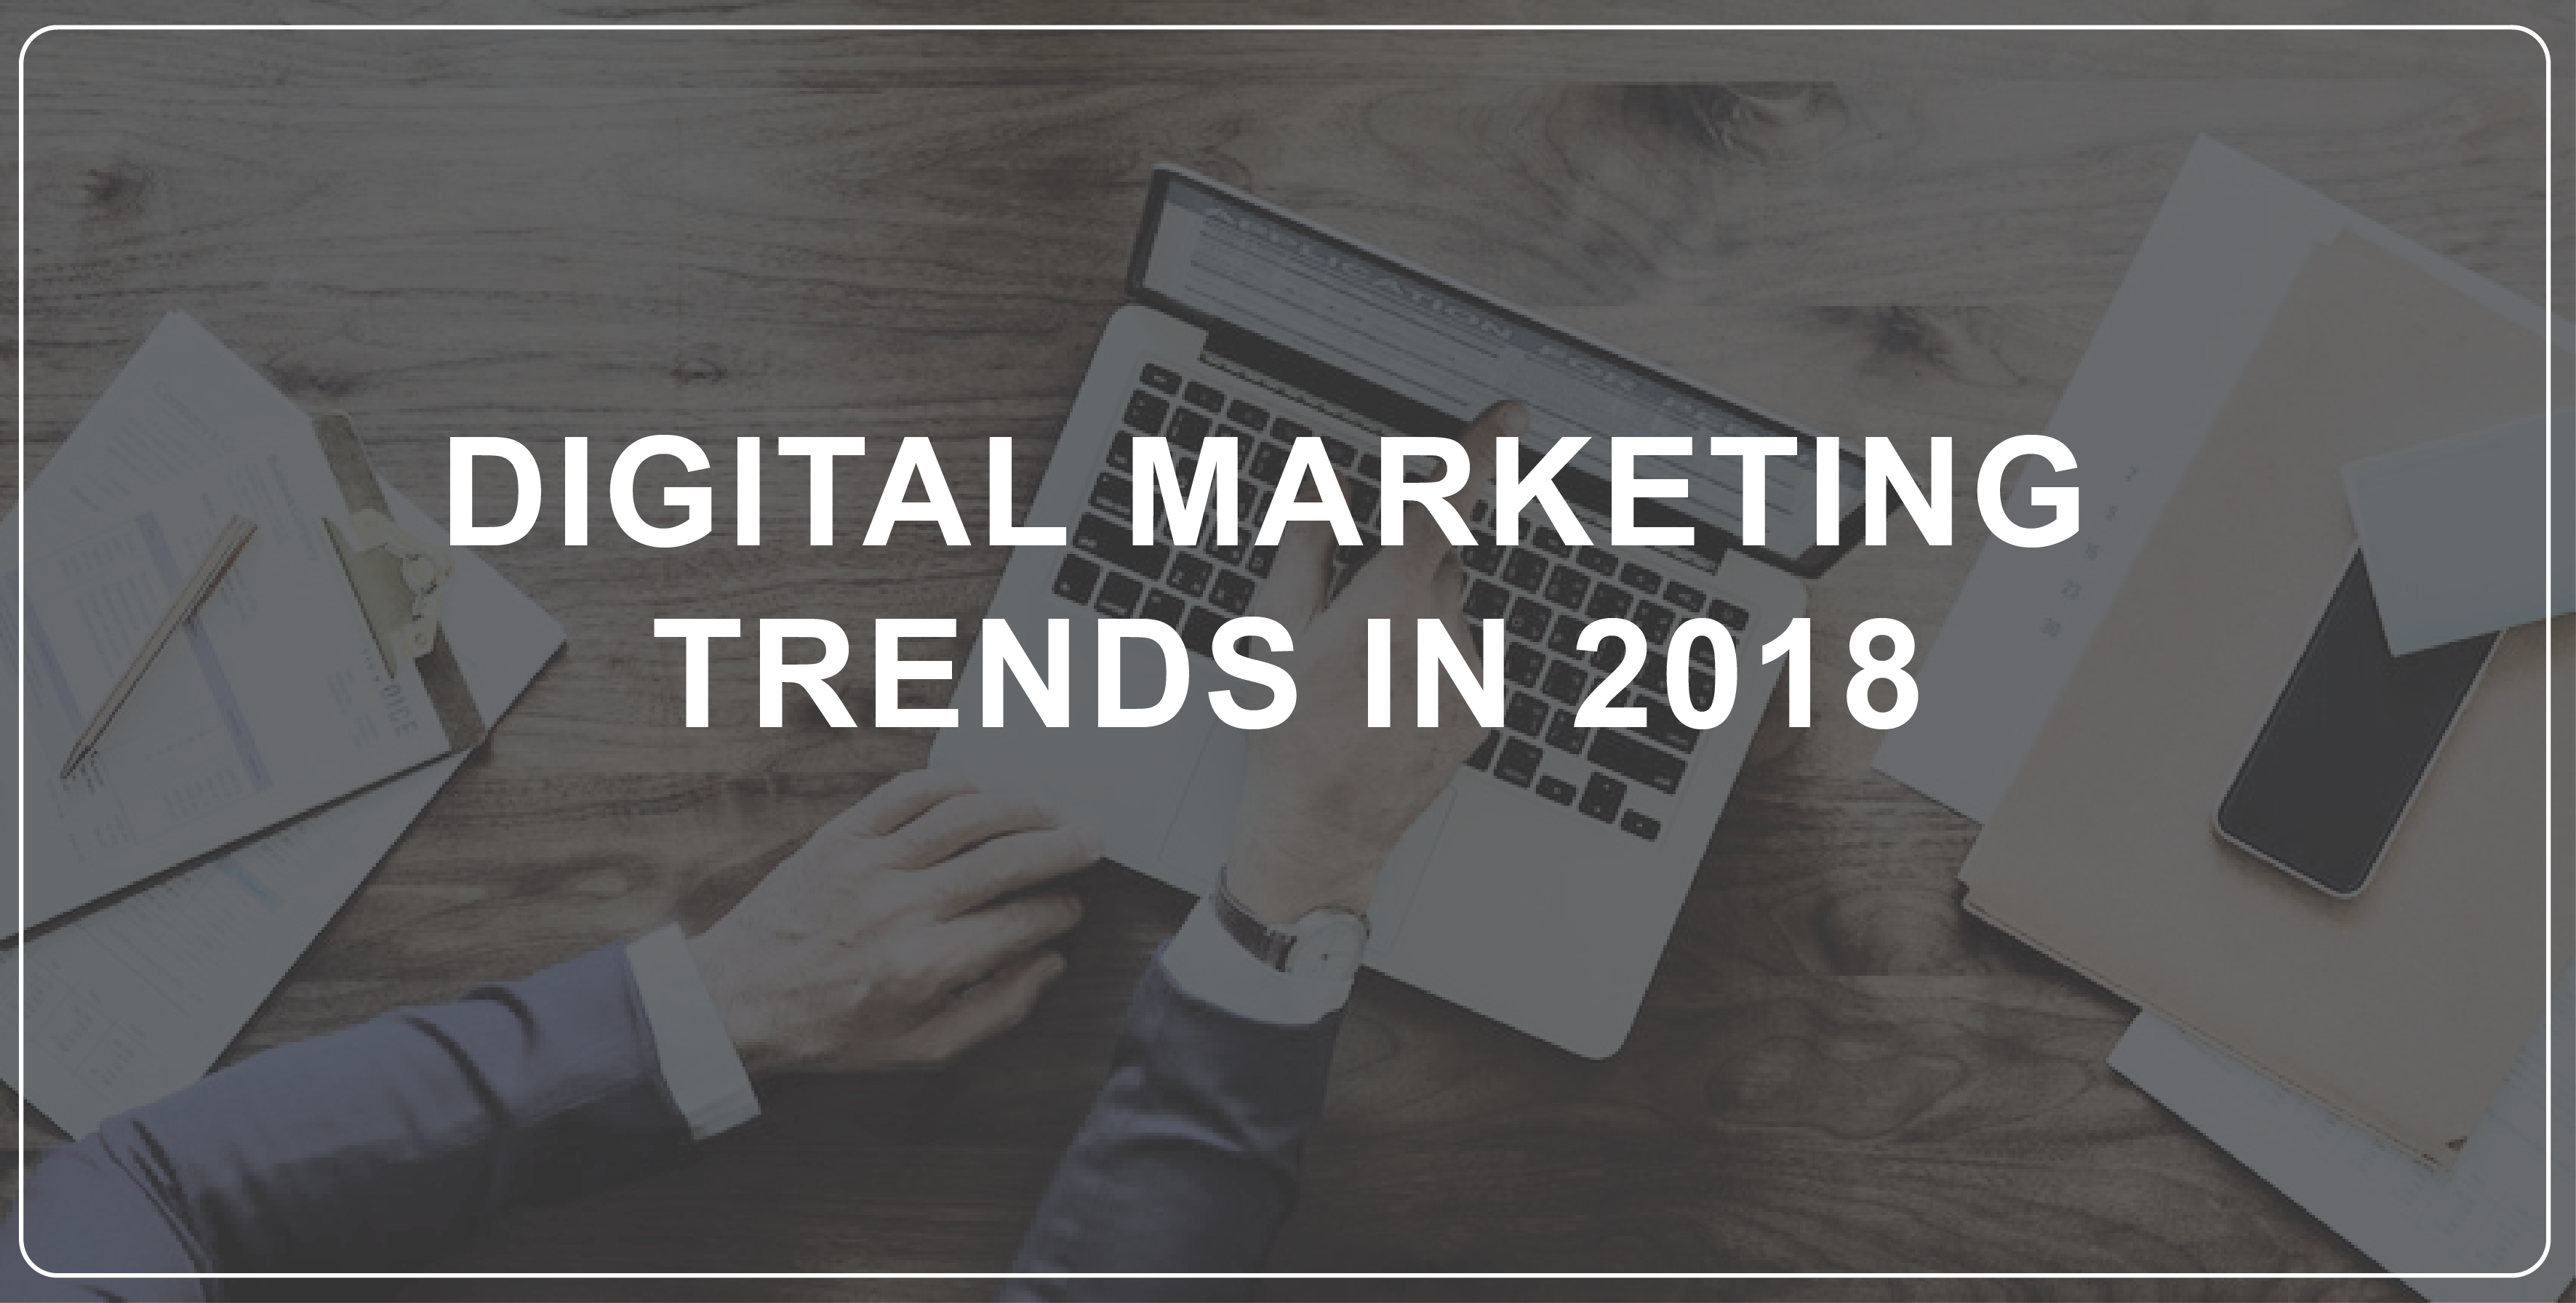 Digital Marketing trends in 2018 Which Drives More Online Sales